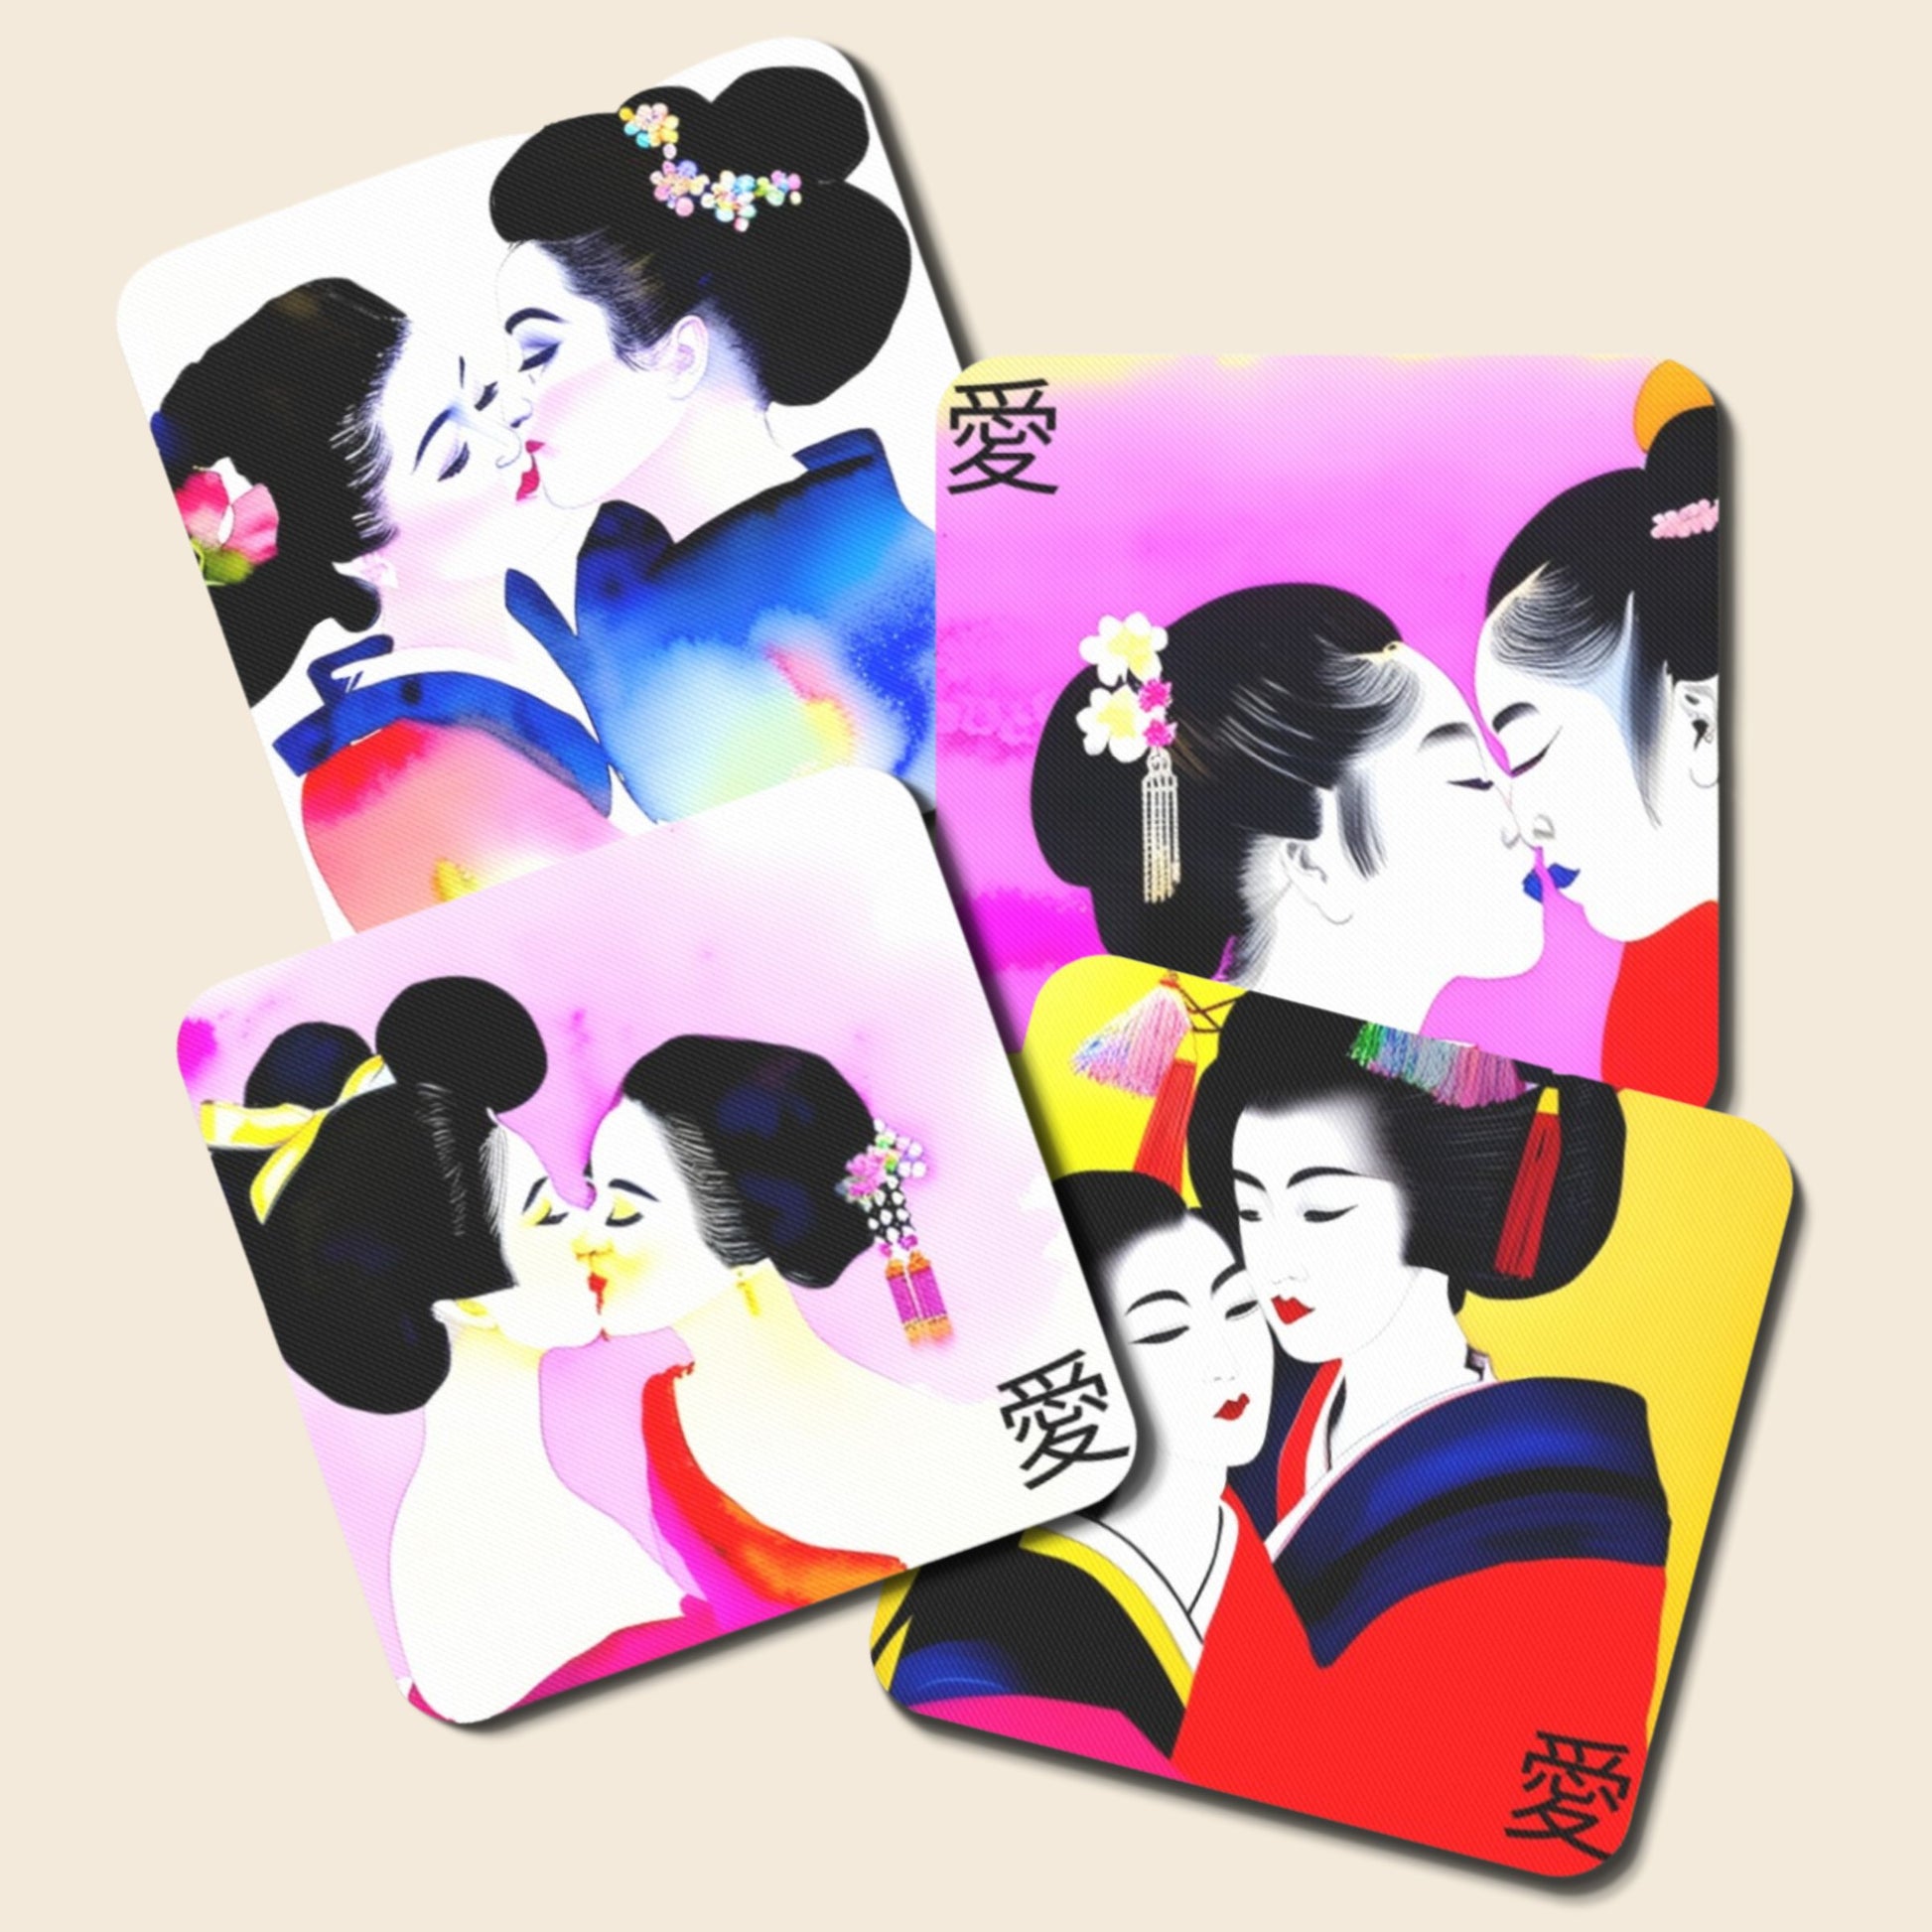 Geishas In Love Coasters all 4 options together